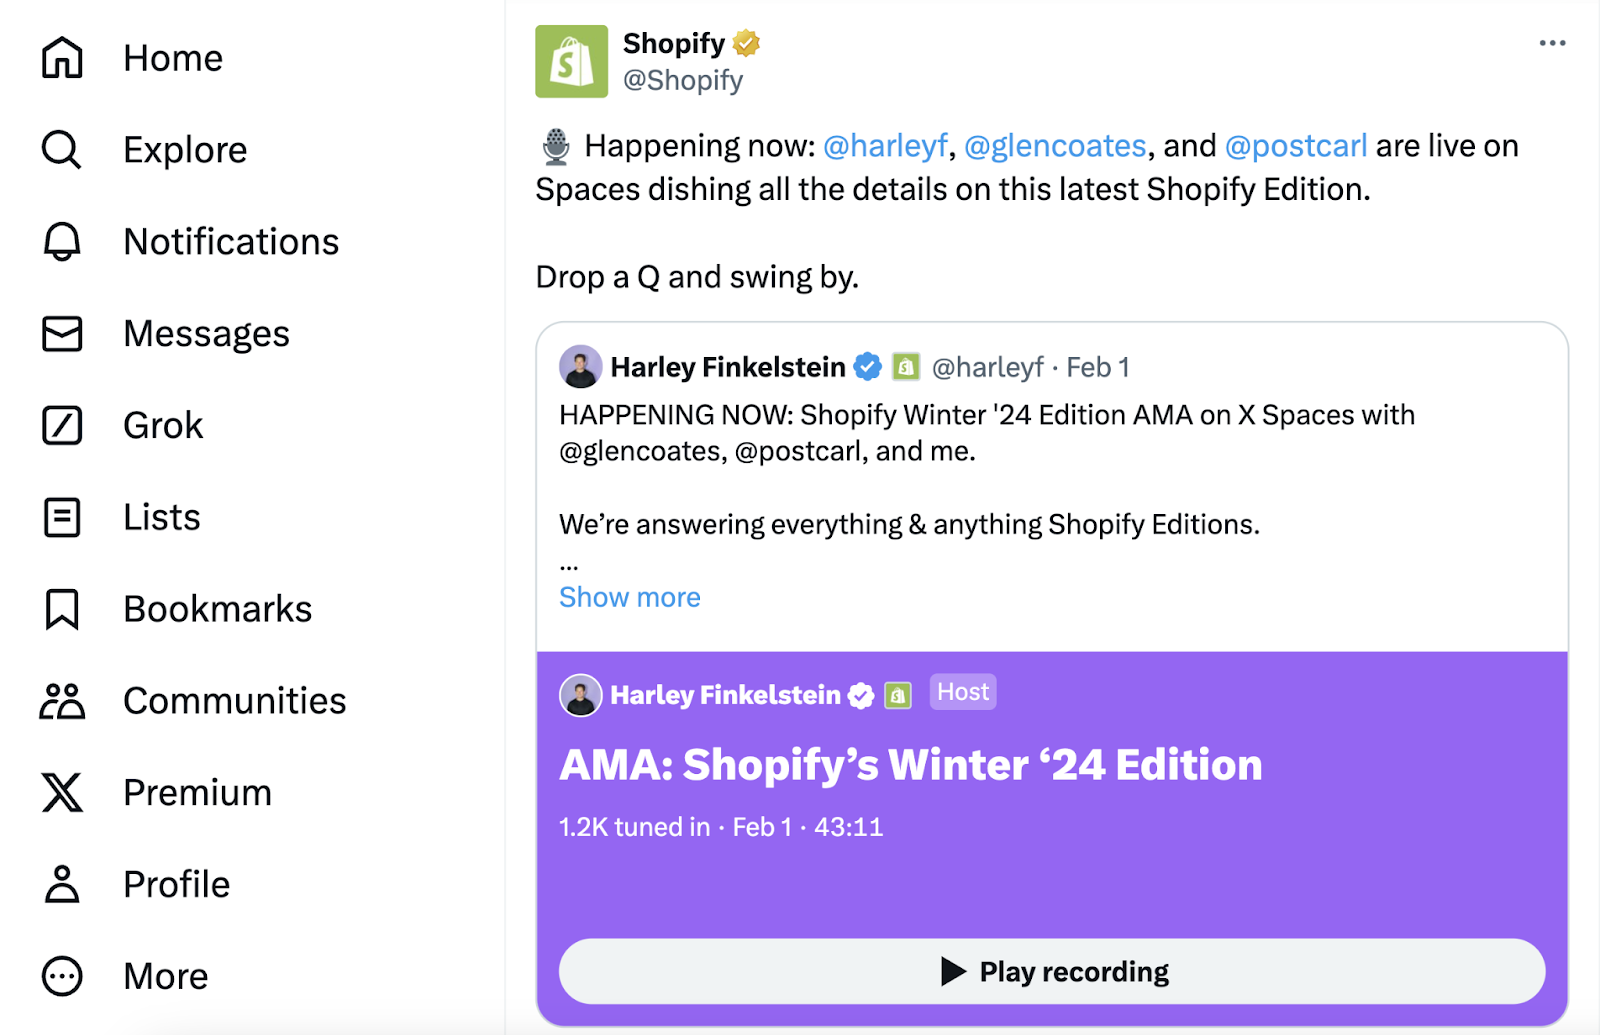 Shopify shared Harley Finkelstein's post about audio conversations on X Spaces